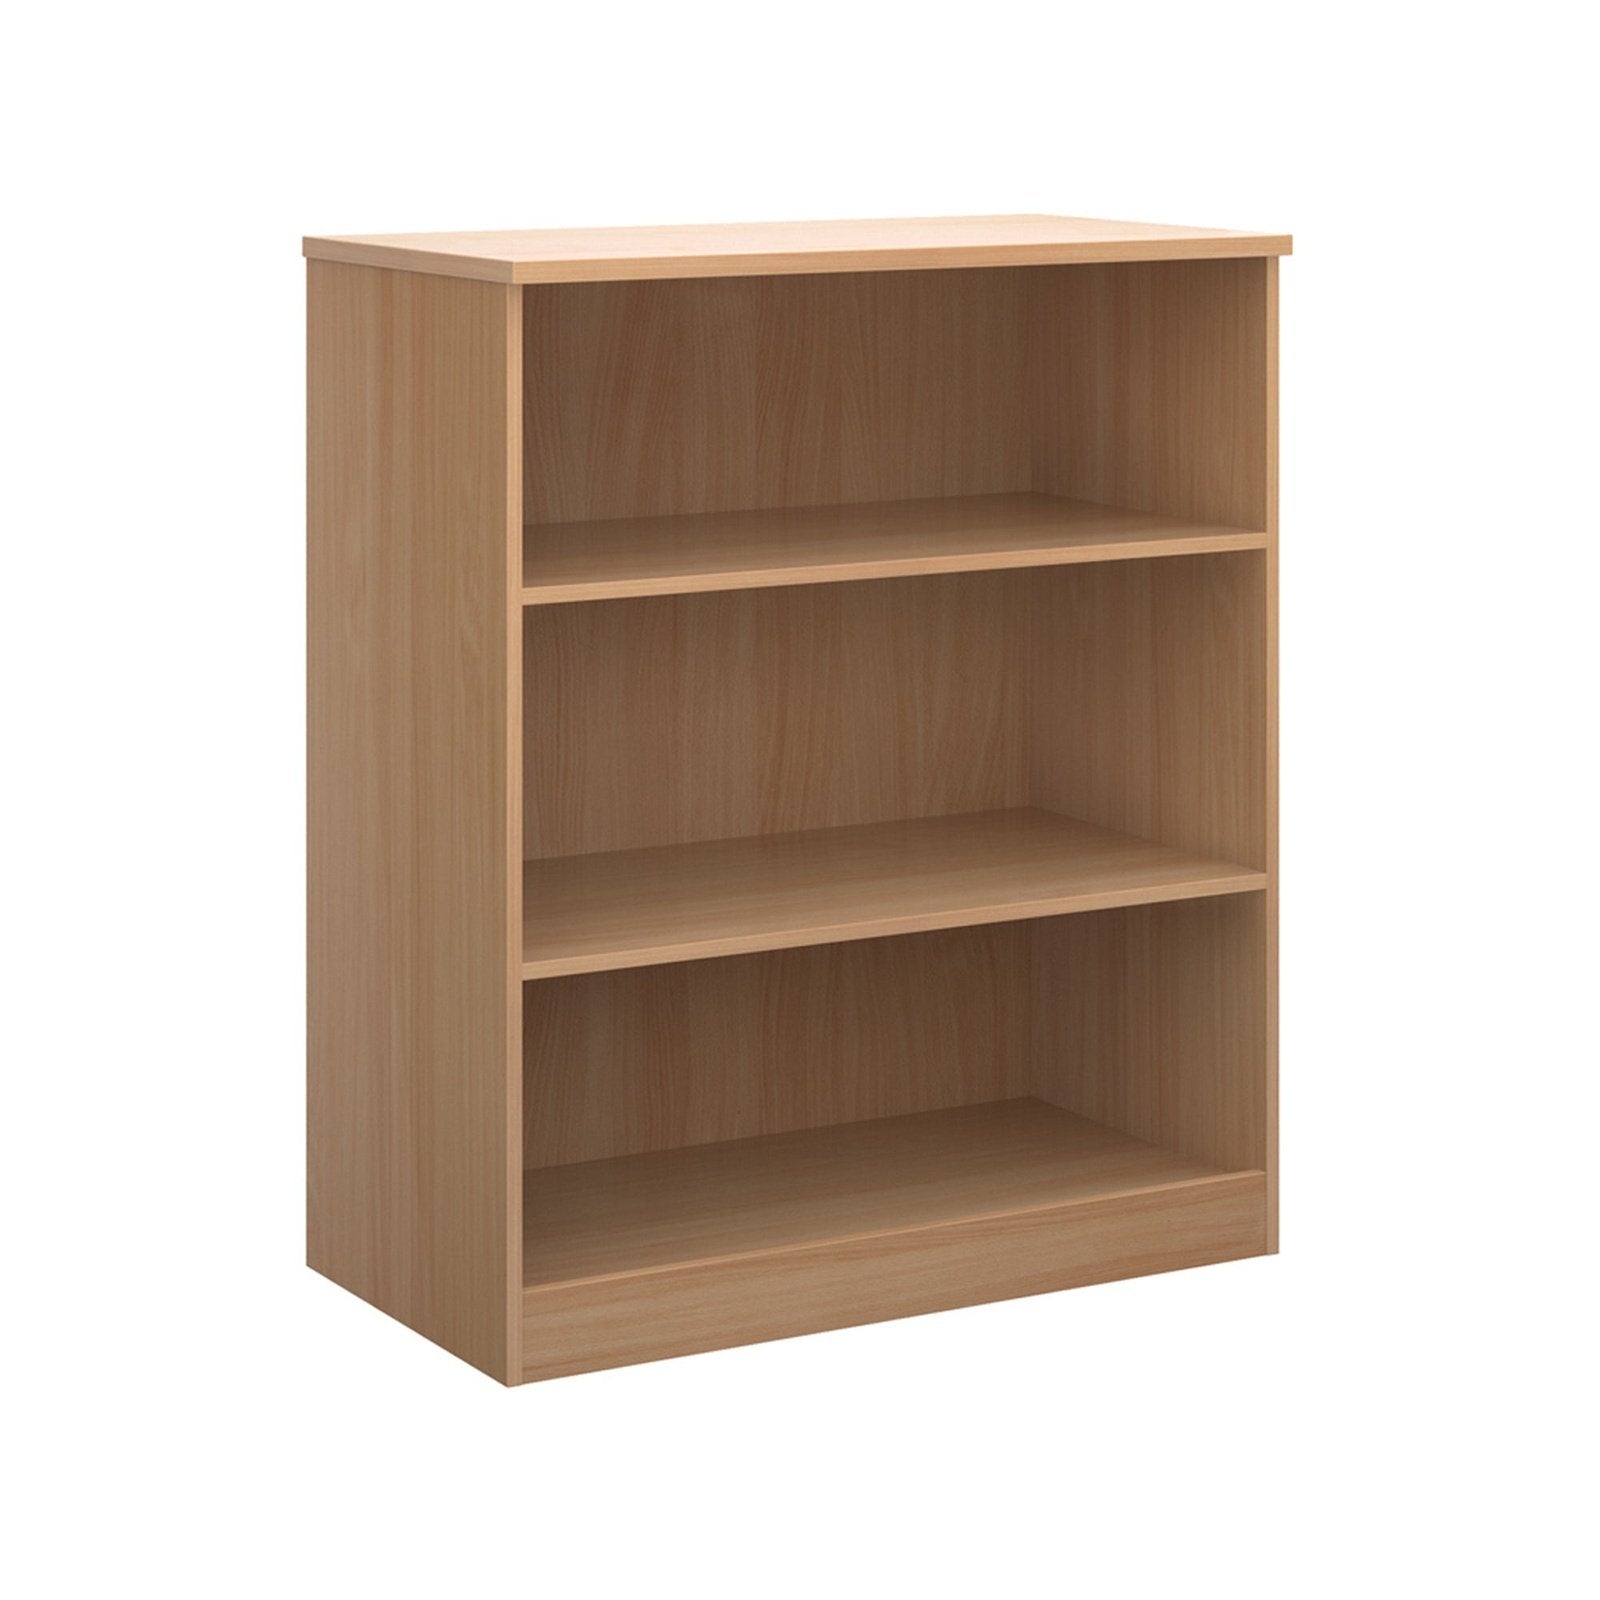 Deluxe bookcase - Office Products Online